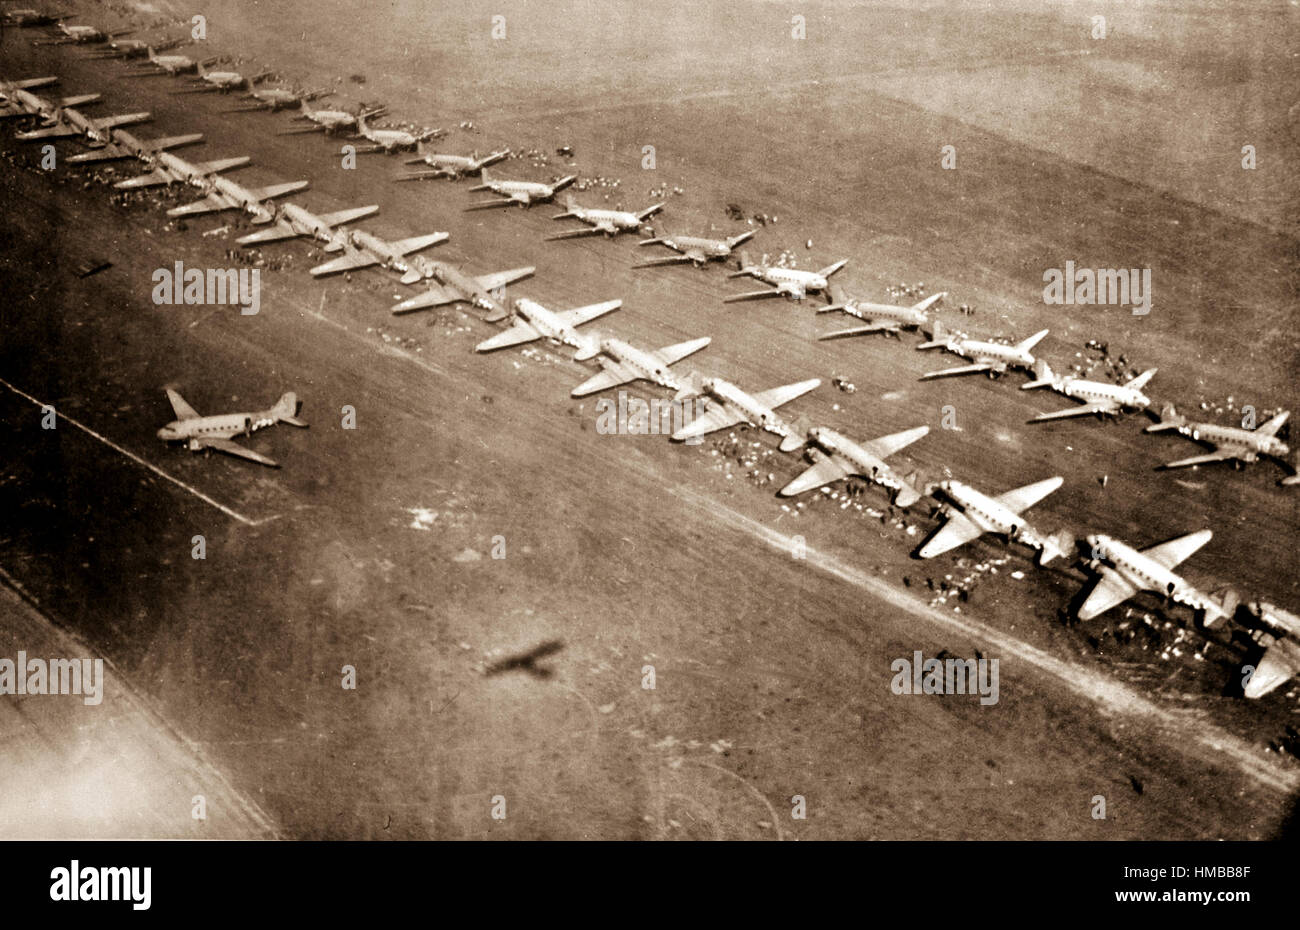 Long, twin lines of C-47 transport planes are loaded with men equipment at an airfield from which they took off for Holland September 17, 1944.  The C-47's carried paratroopers of the First Allied Airbone Army.  England. (Army)  NARA FILE #:  208-AA-56T-4  WAR & CONFLICT BOOK #:  1063 Stock Photo